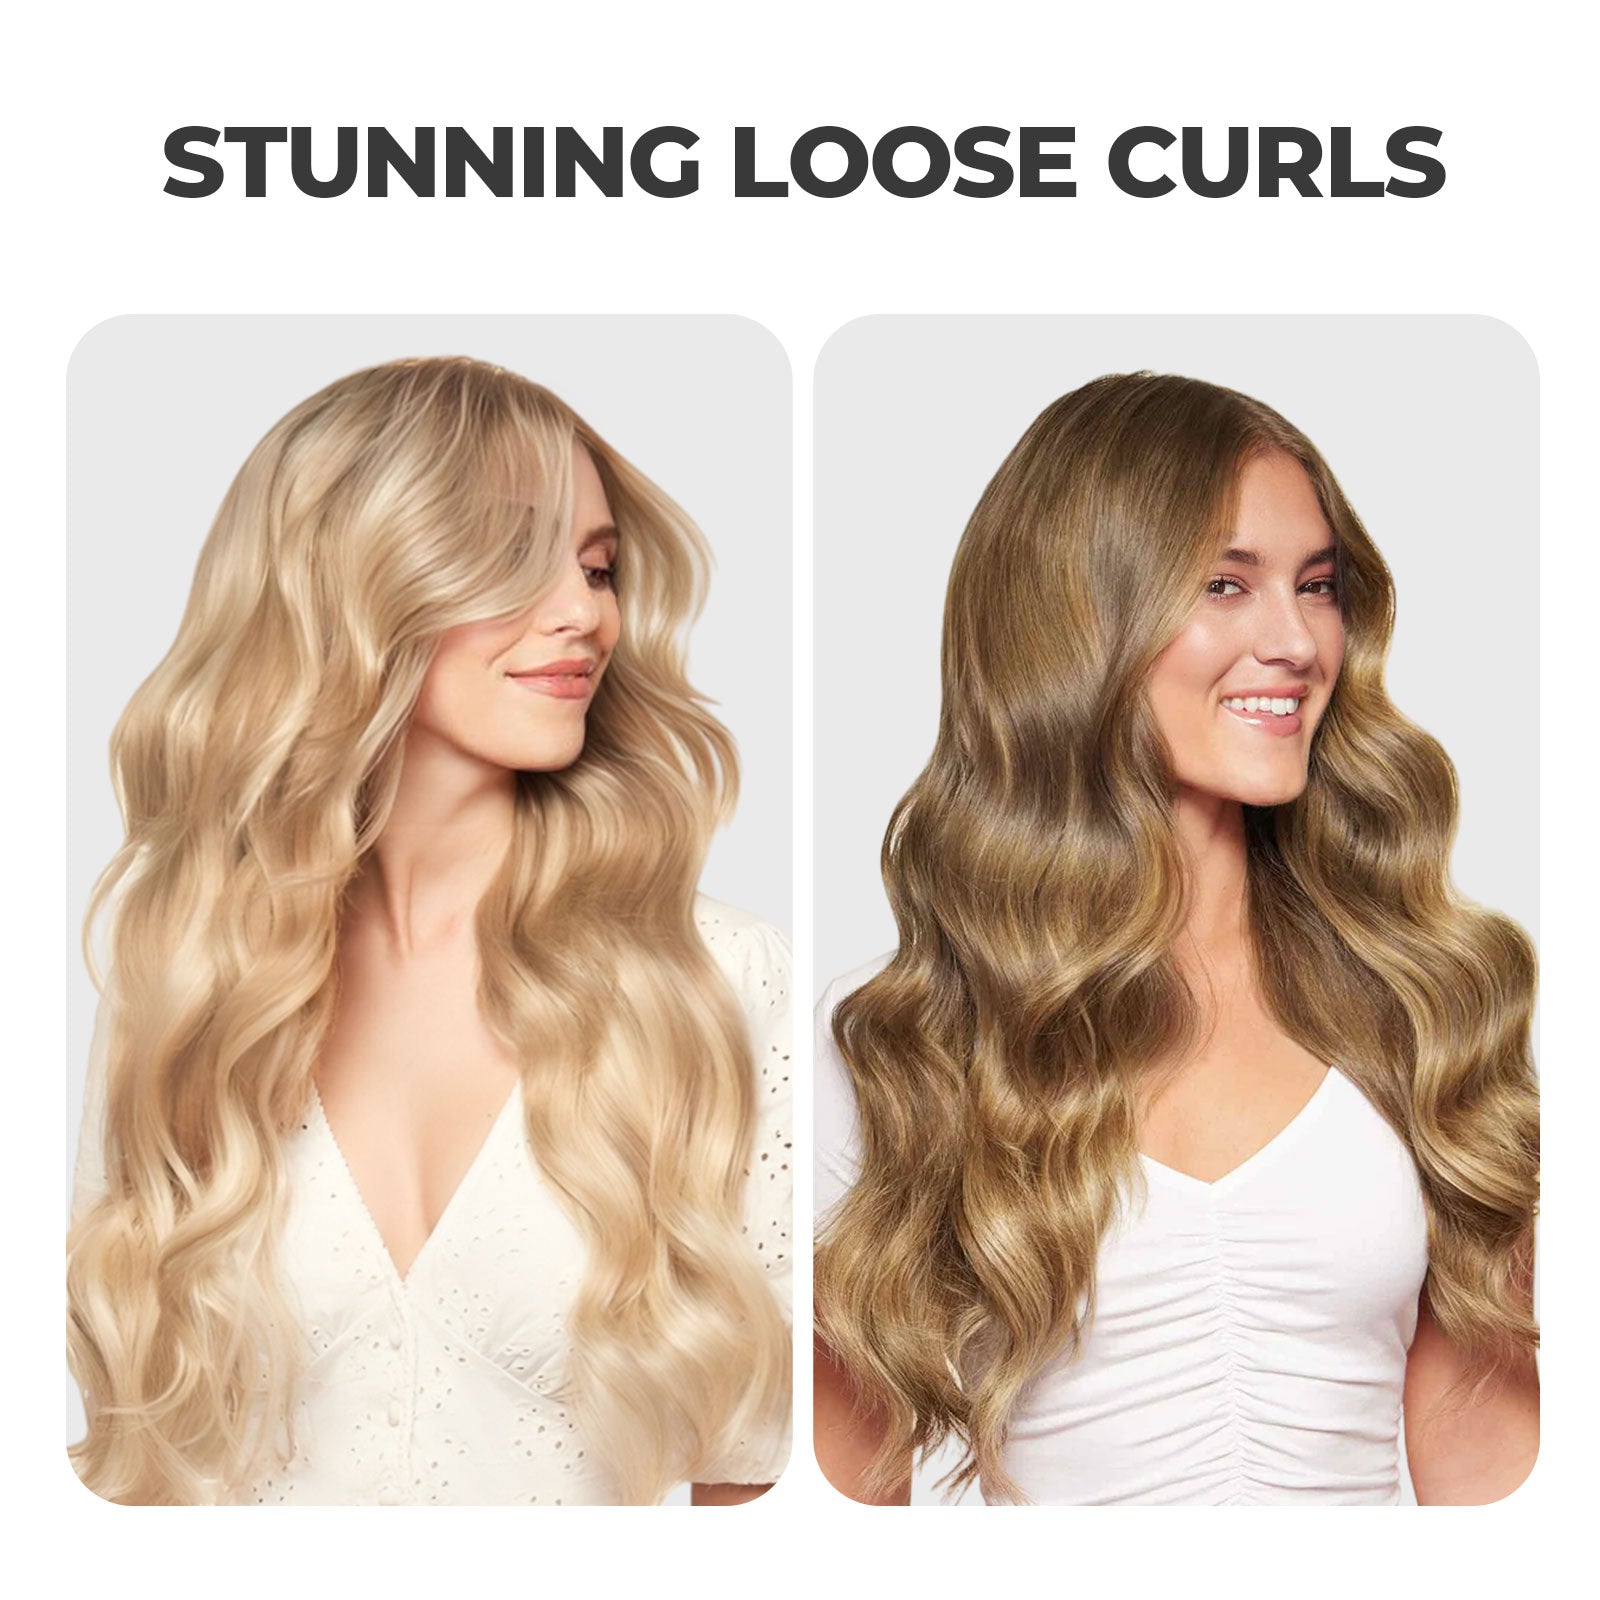 Loose curls hairstyle created using TYMO CURLGO Auto Cordless Curler, featured on two women with long hair.